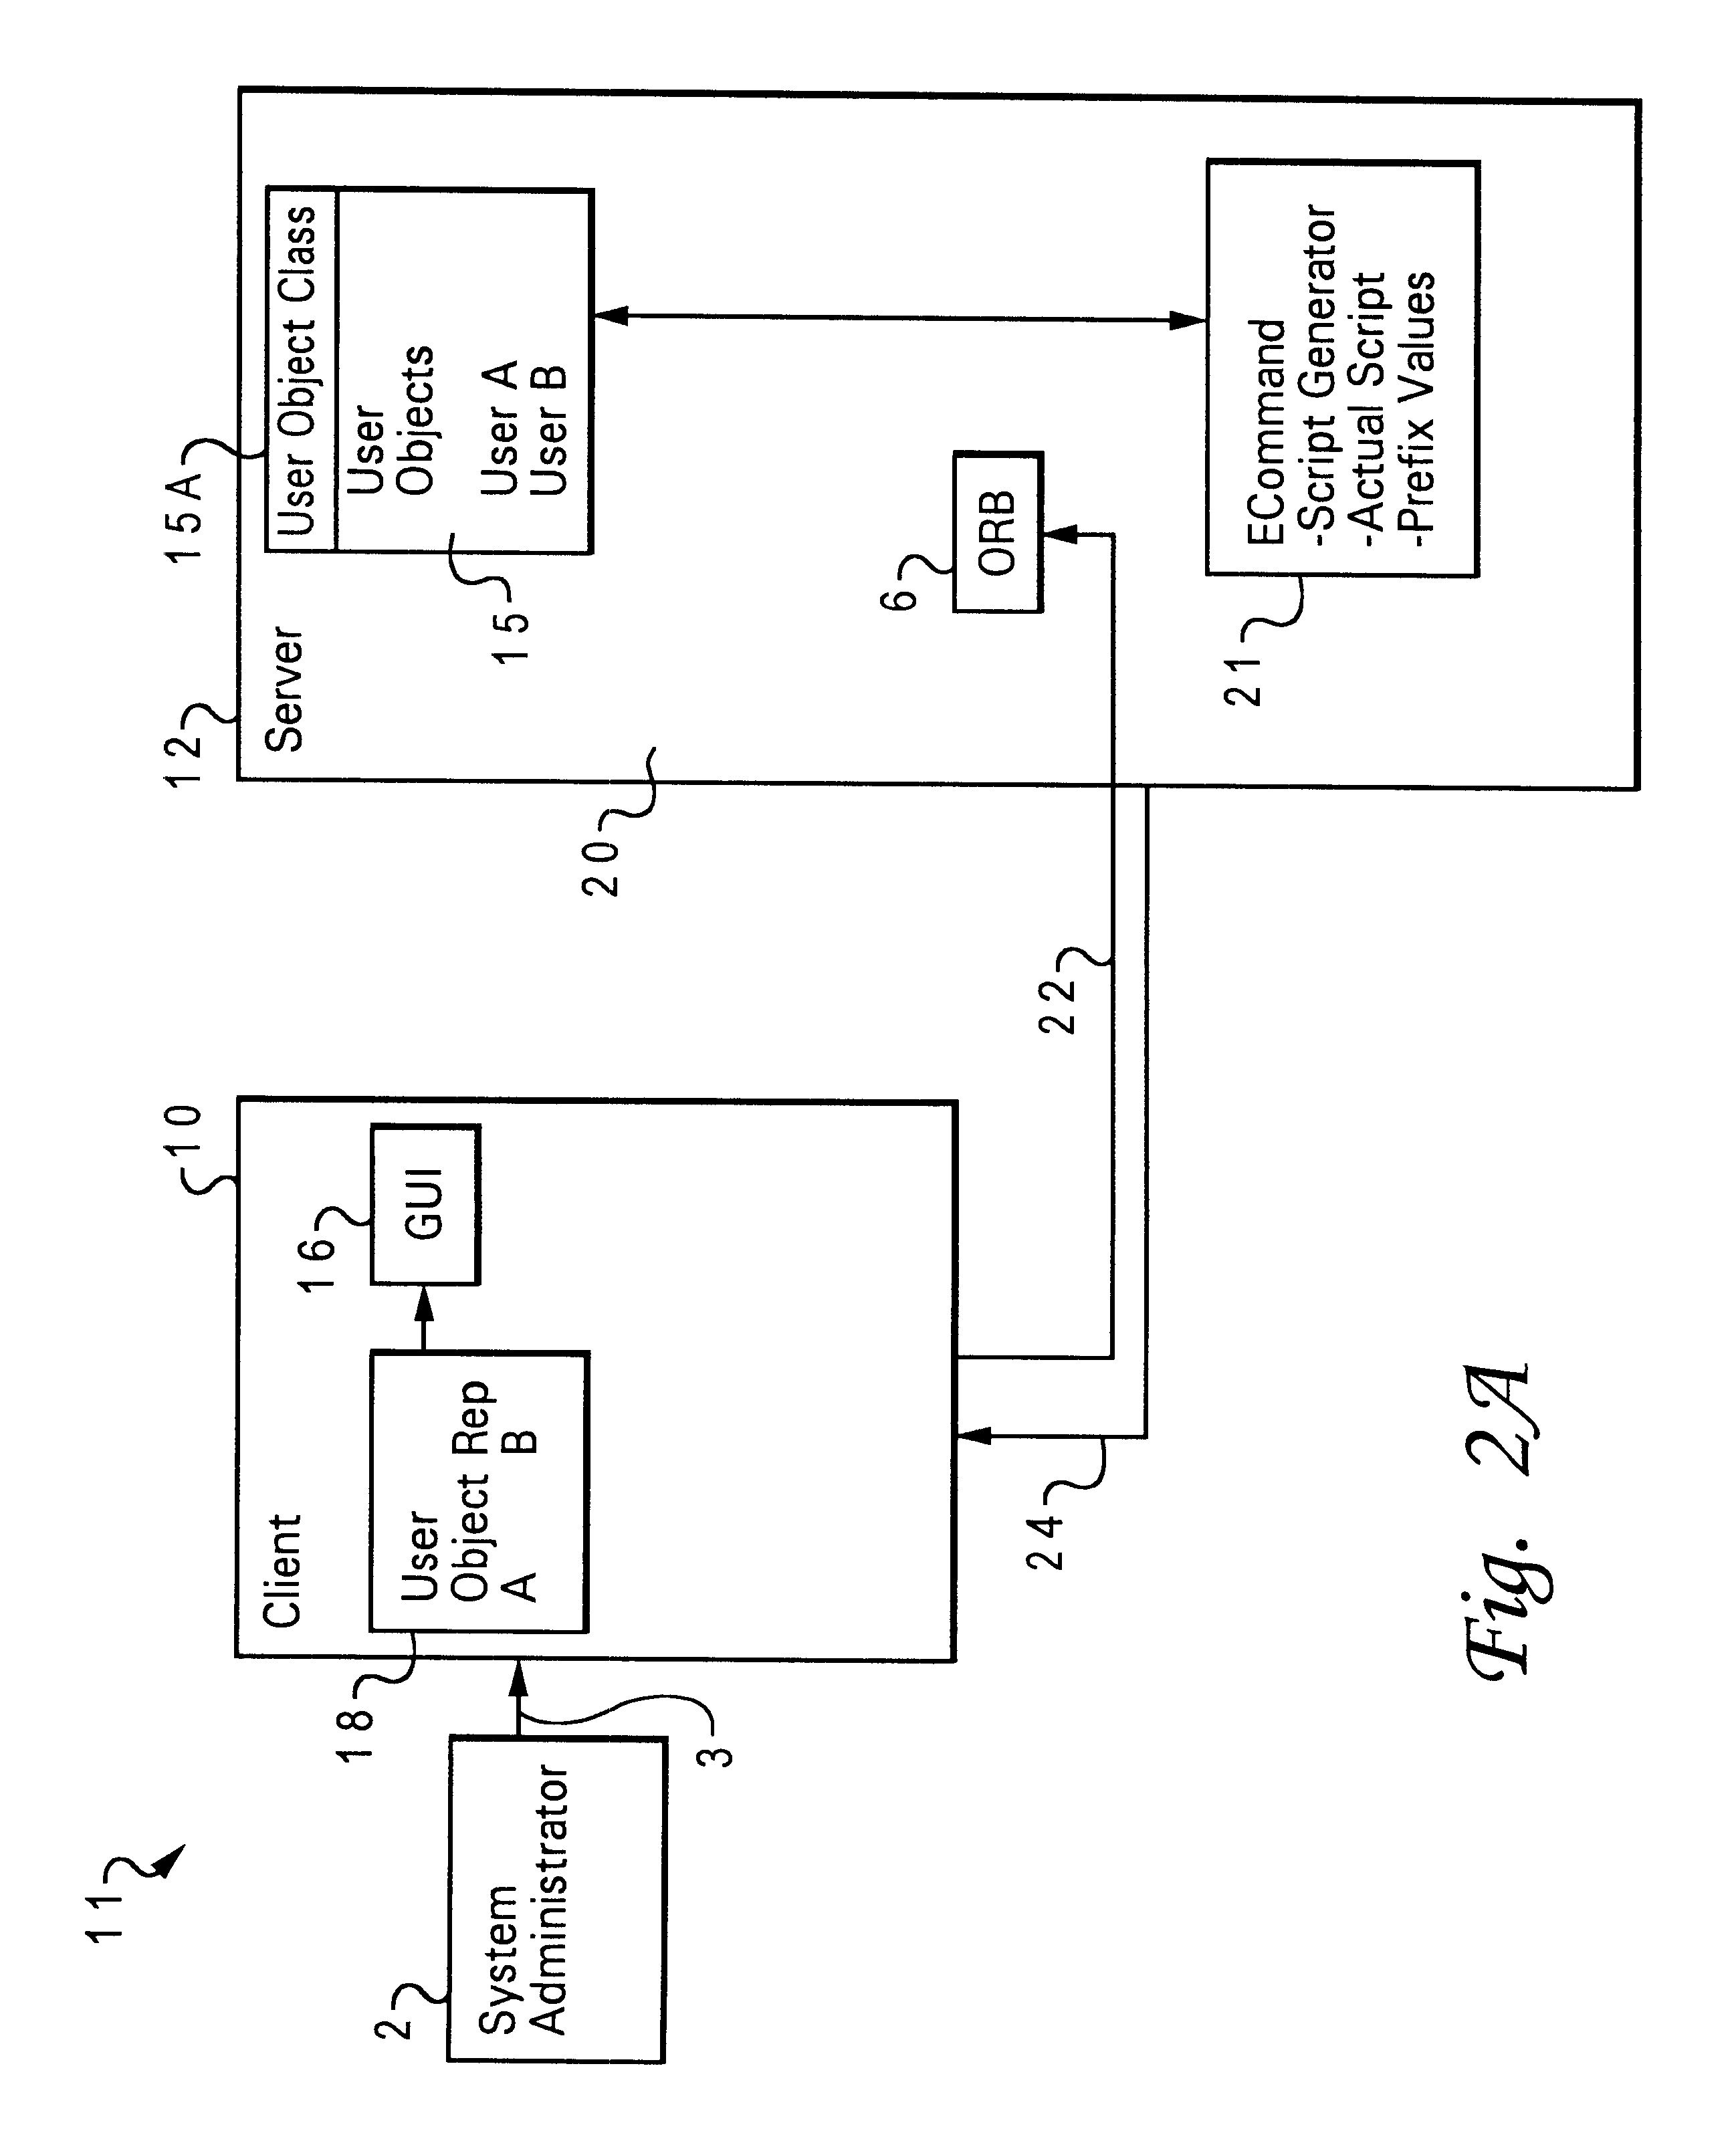 Method, system, and program for parameter expansion, generation, and execution of scripts in a networked environment